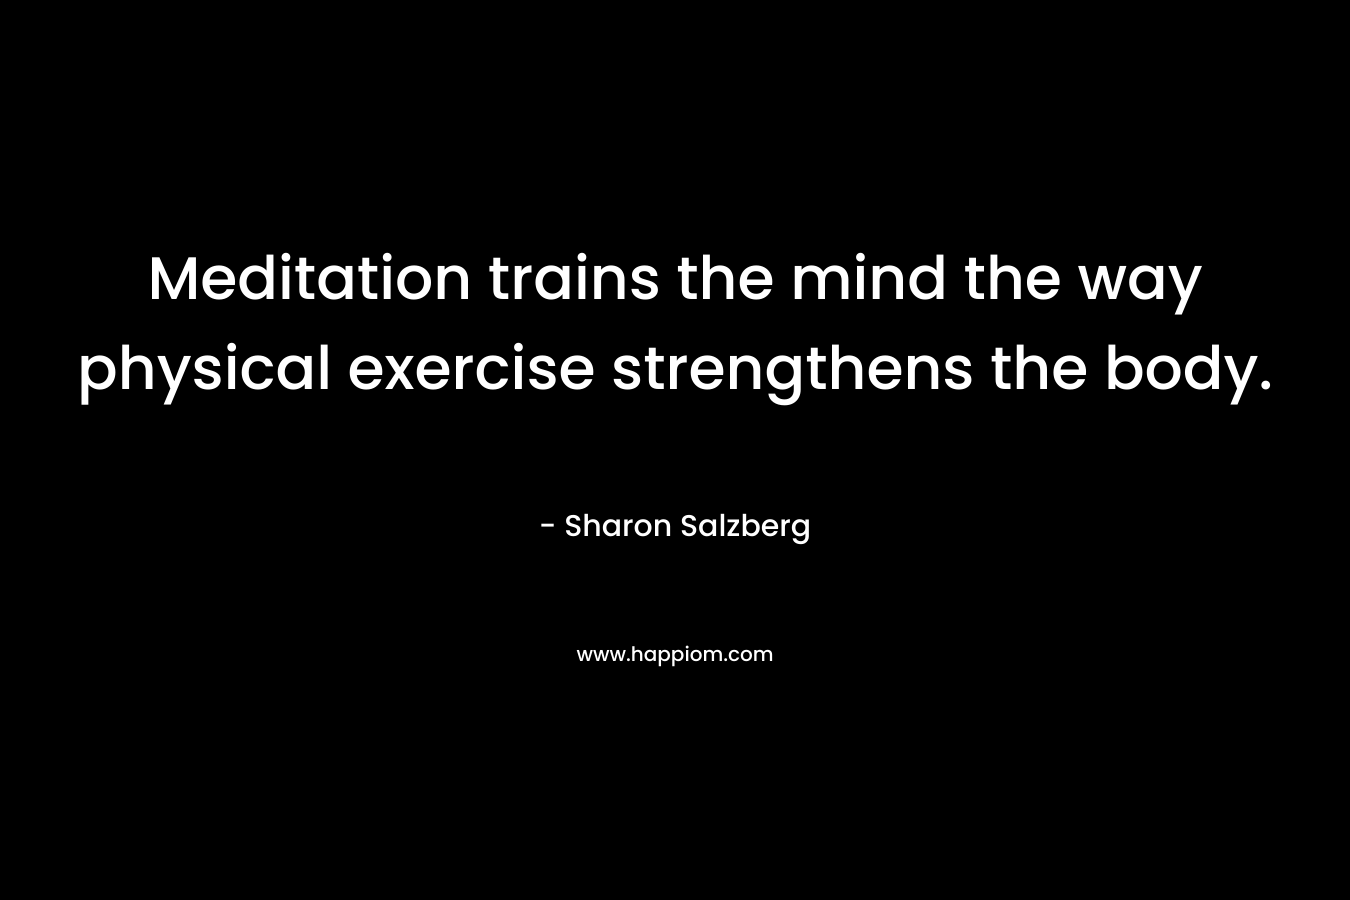 Meditation trains the mind the way physical exercise strengthens the body.